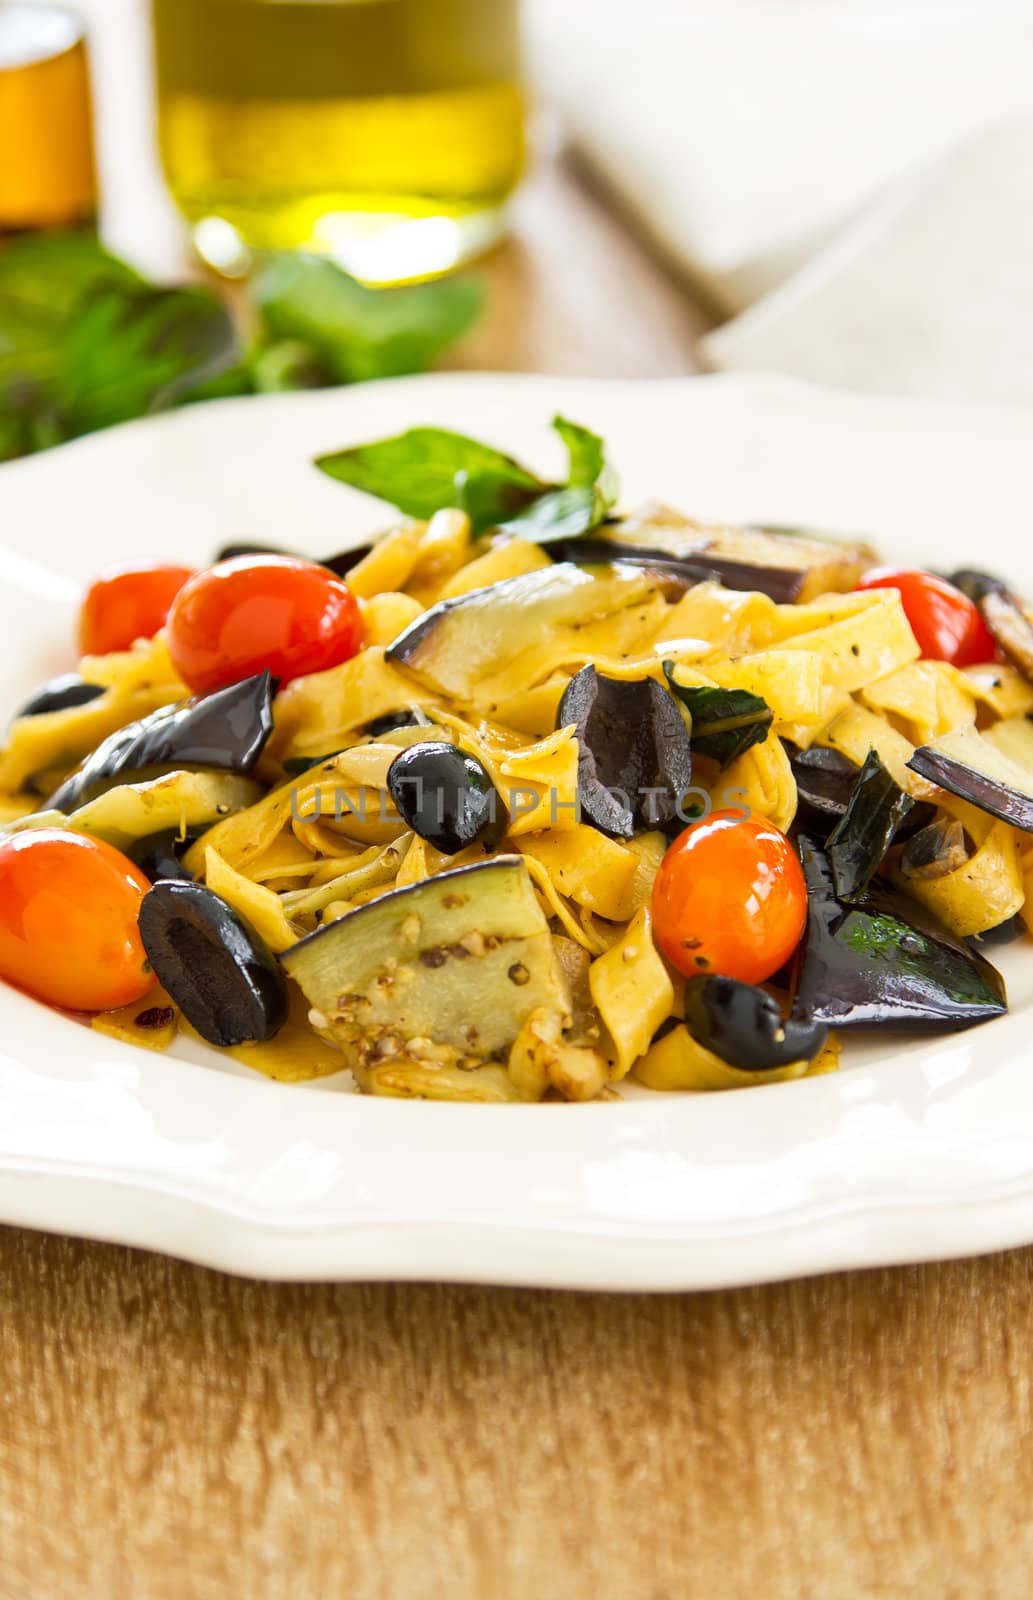 Fettuccine with aubergine and olive by vanillaechoes